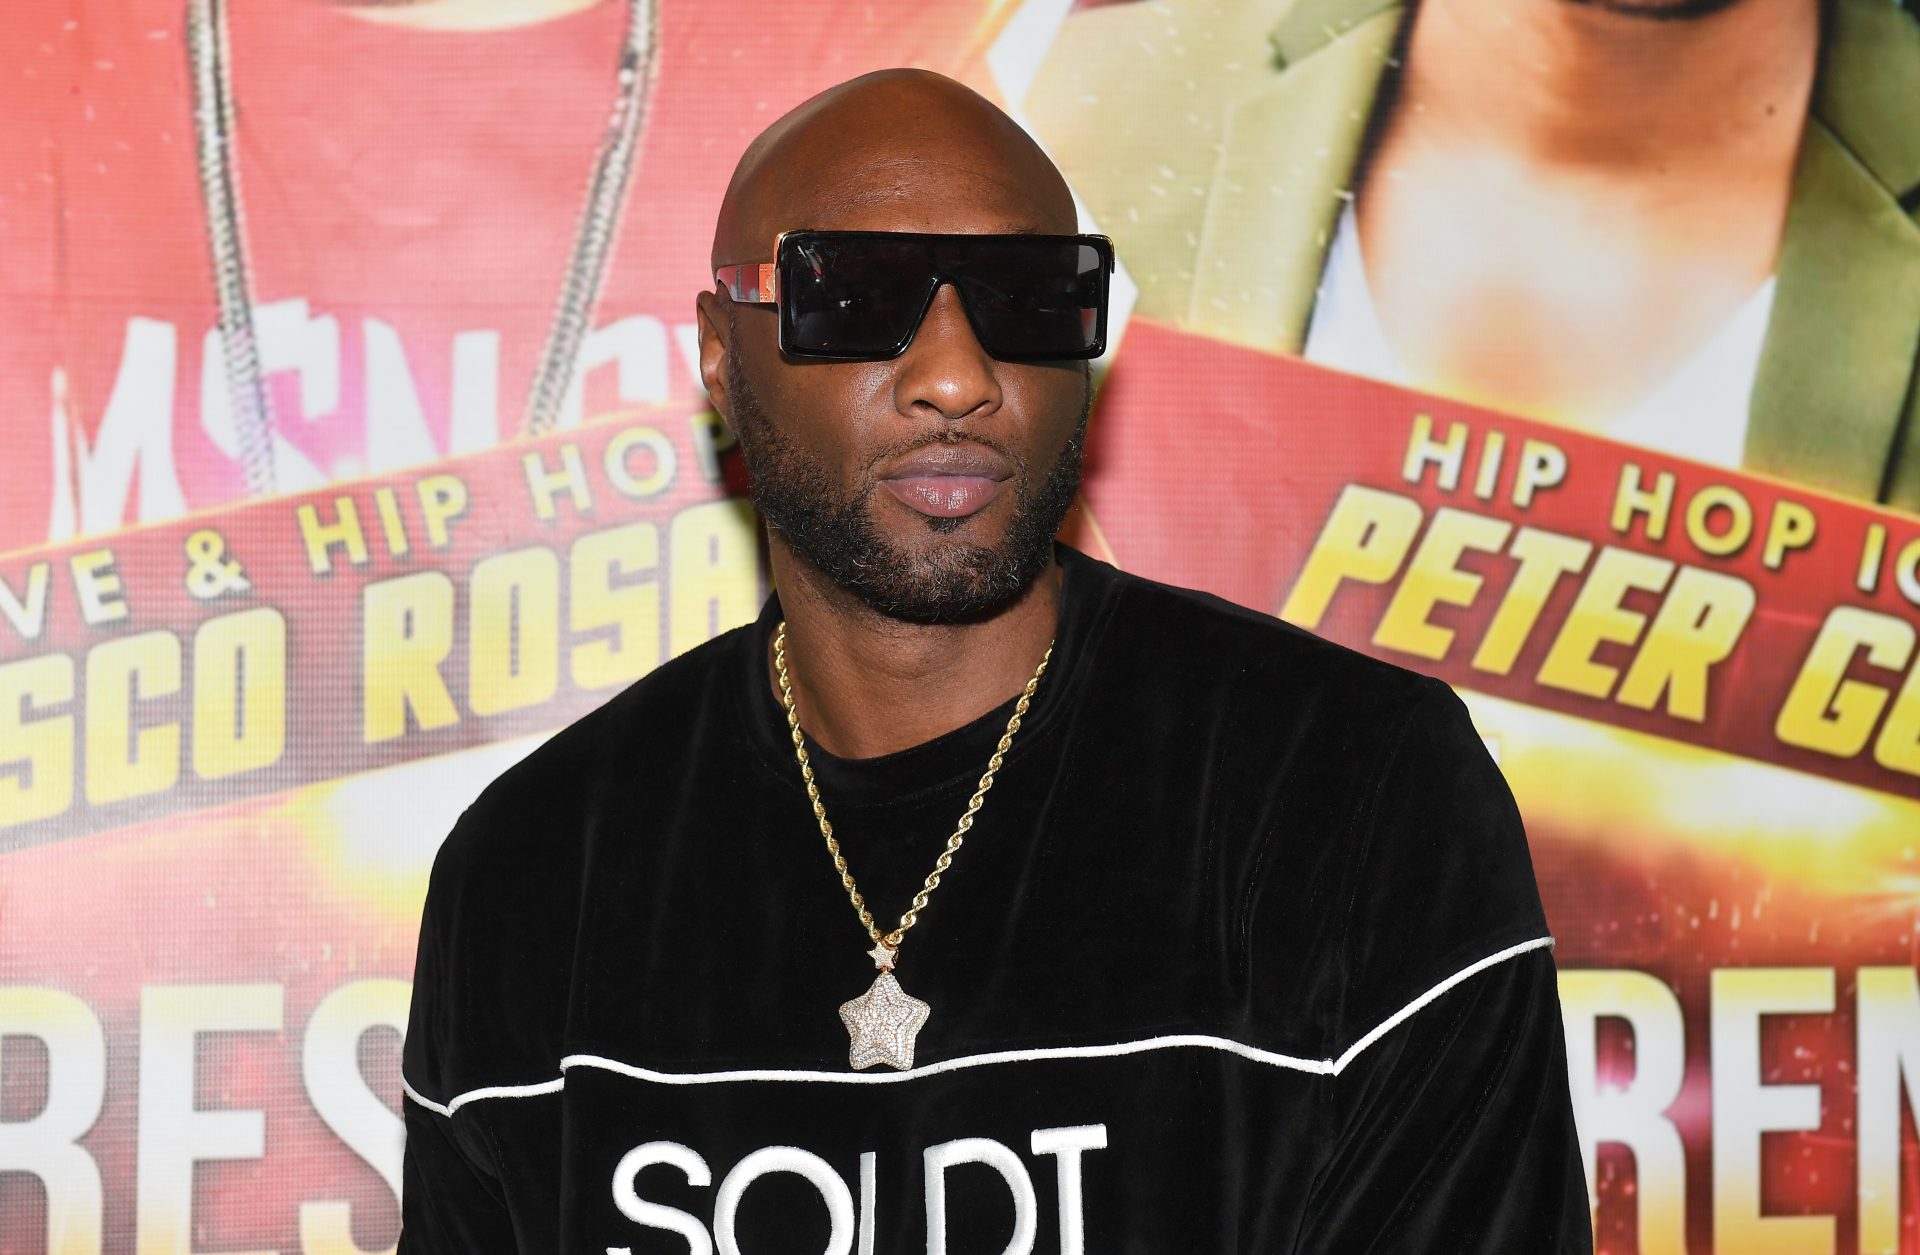 Video: Lamar Odom Says He’s Going to KO Aaron Carter in 1st Minute of Boxing Battle